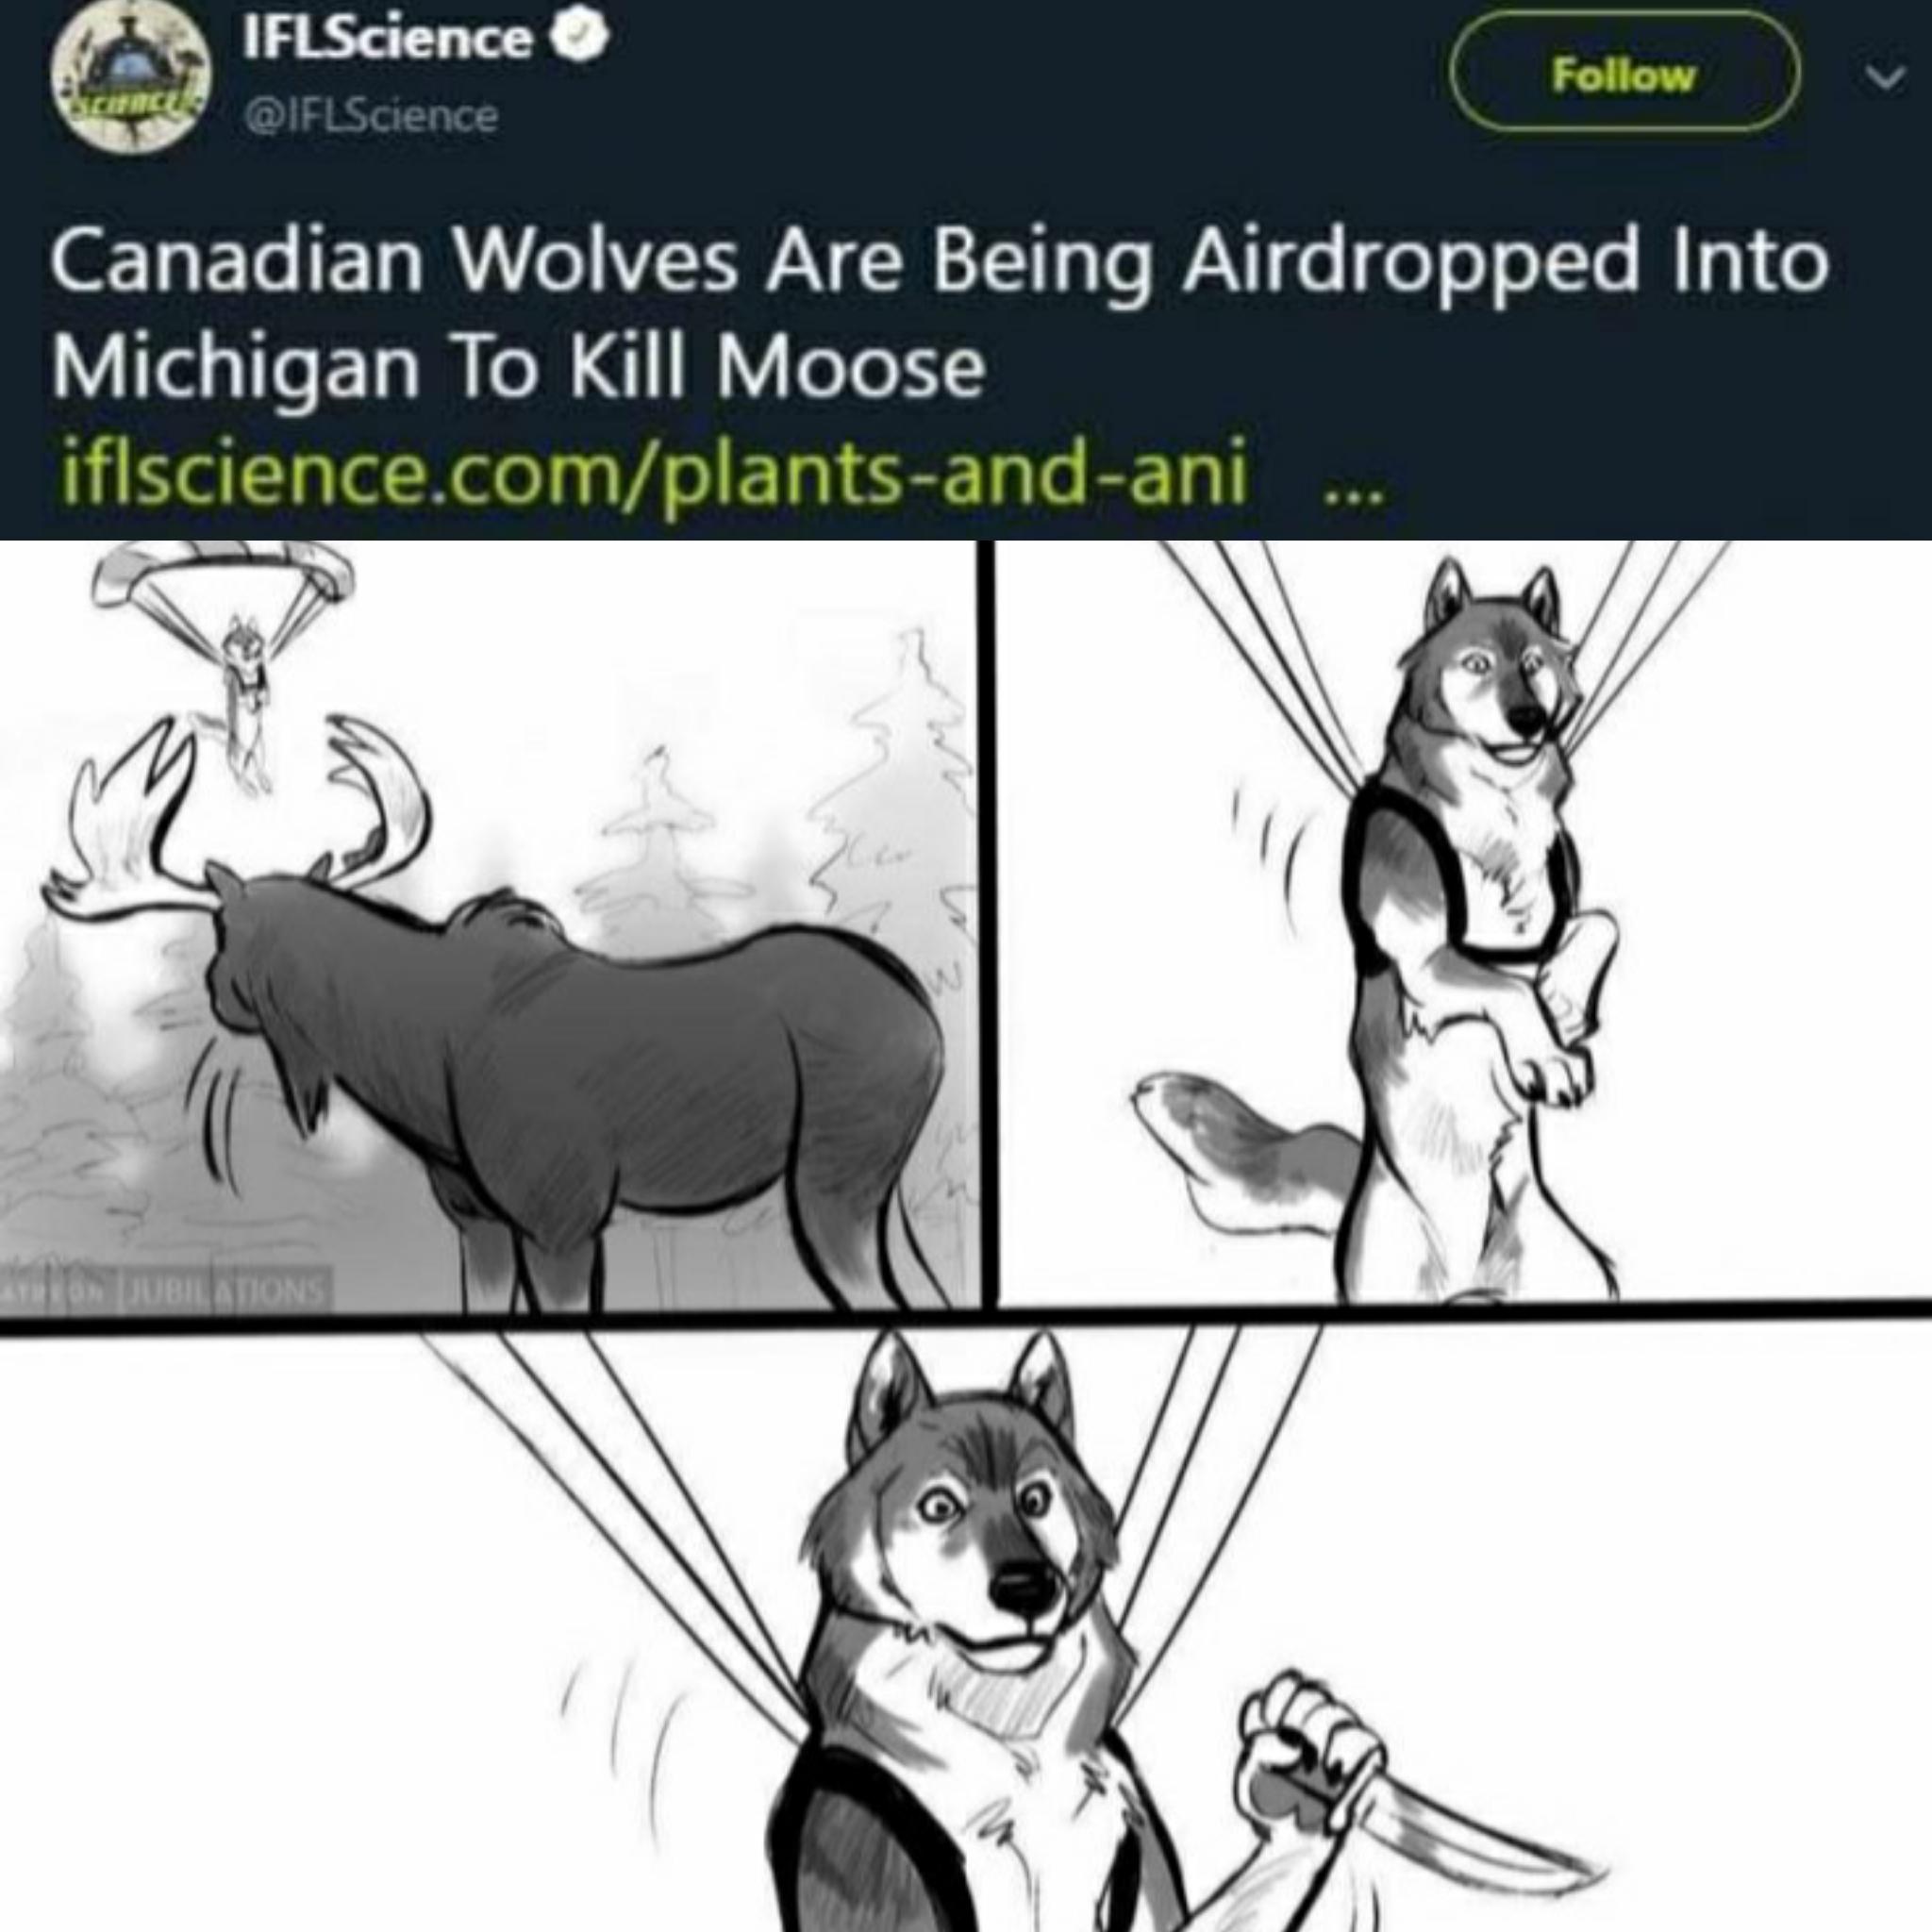 wolves airdropped to kill moose - IFLScience brand Canadian Wolves Are Being Airdropped Into Michigan To Kill Moose iflscience.complantsandani w N Dublations